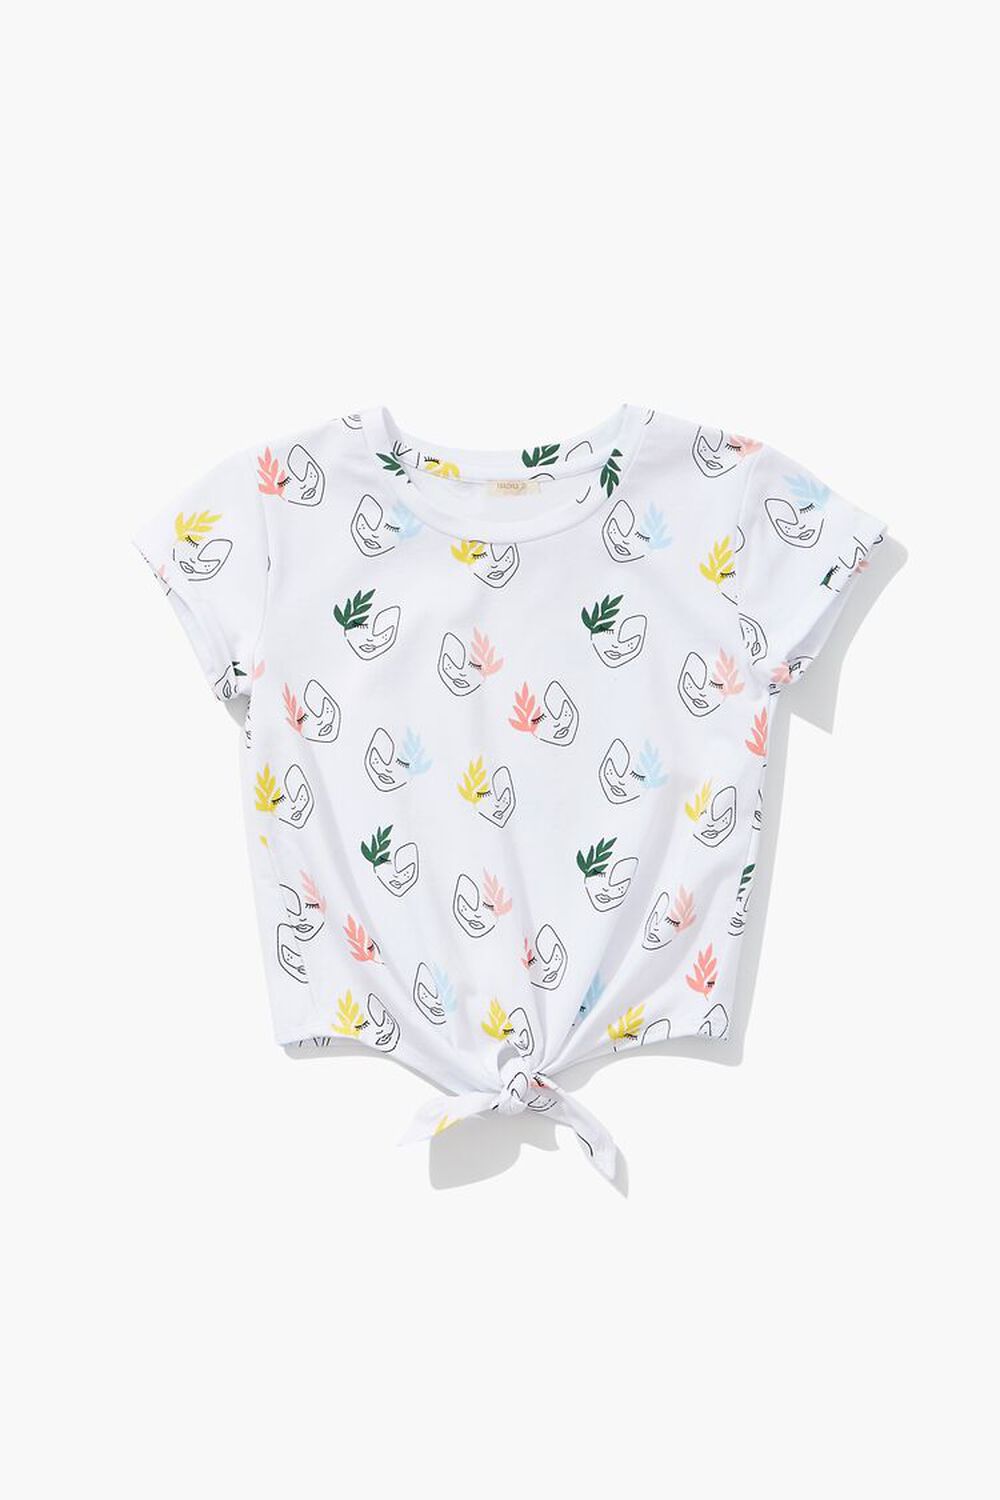 WHITE/MULTI Girls Leaf Face Print Knotted Tee (Kids), image 1